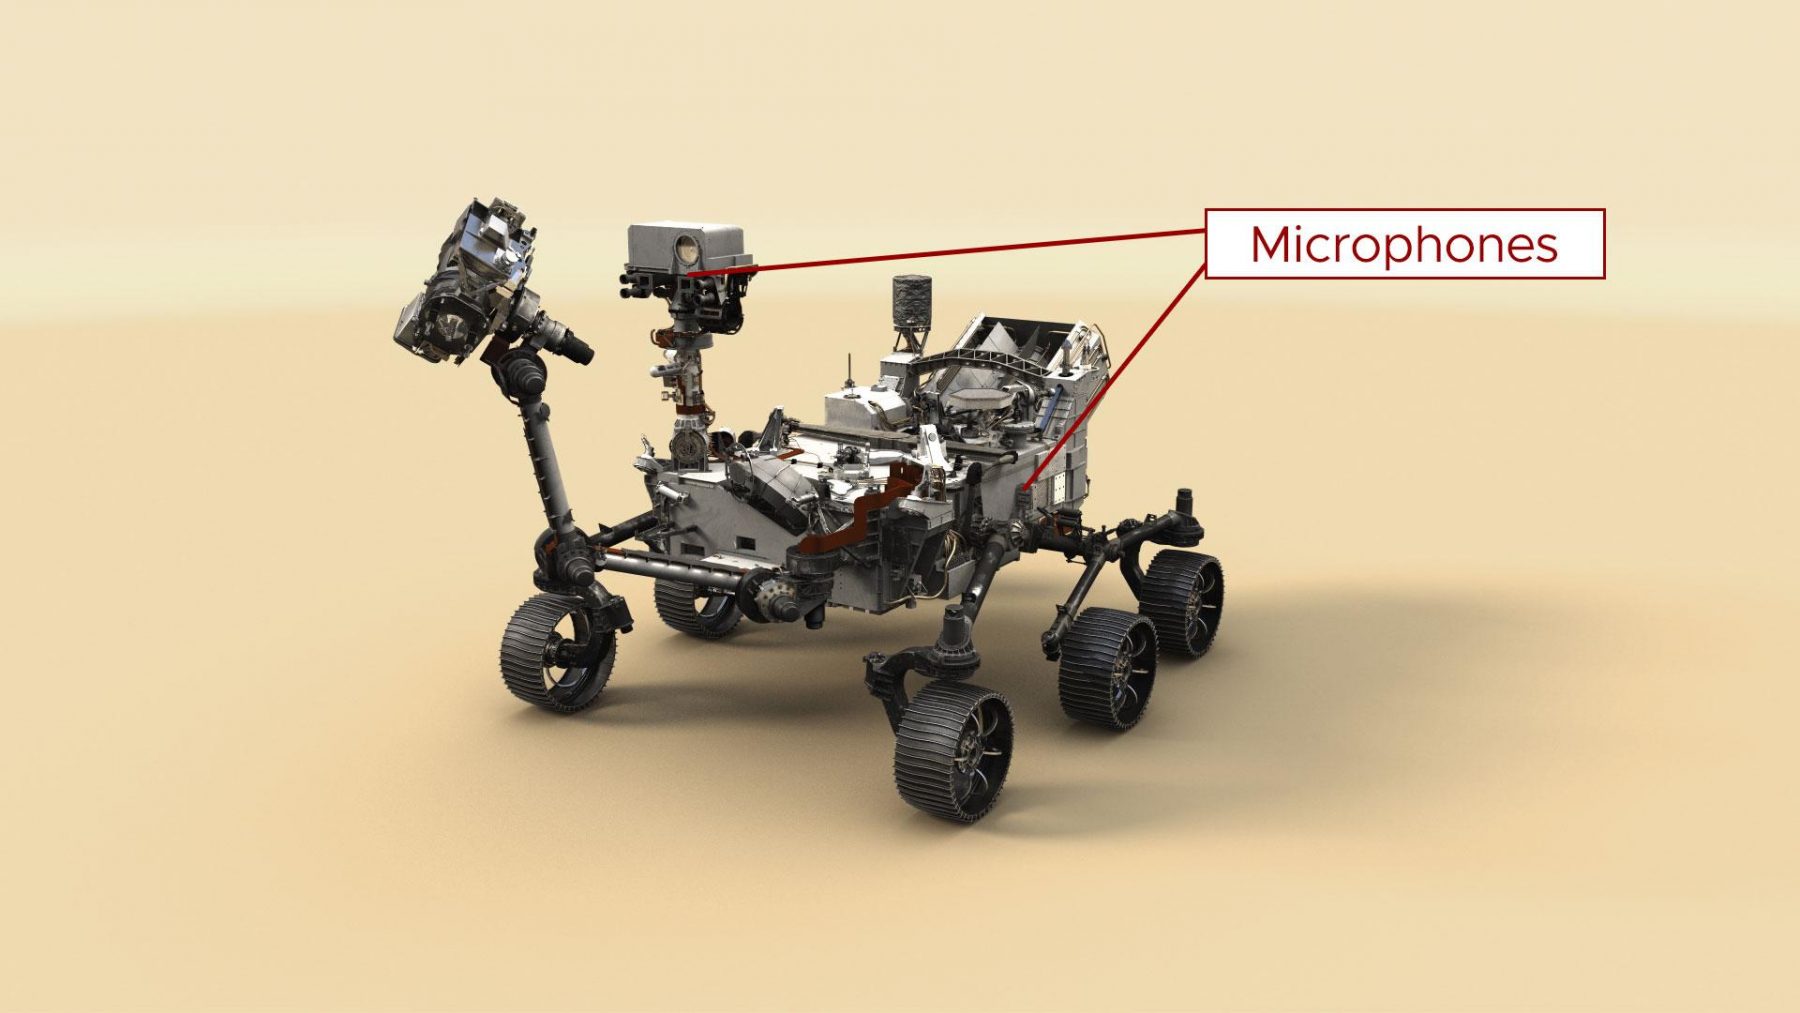 The six-wheeled rover has two microphones, one on the port side and one on the mast, as part of the SuperCam. Credit: NASA